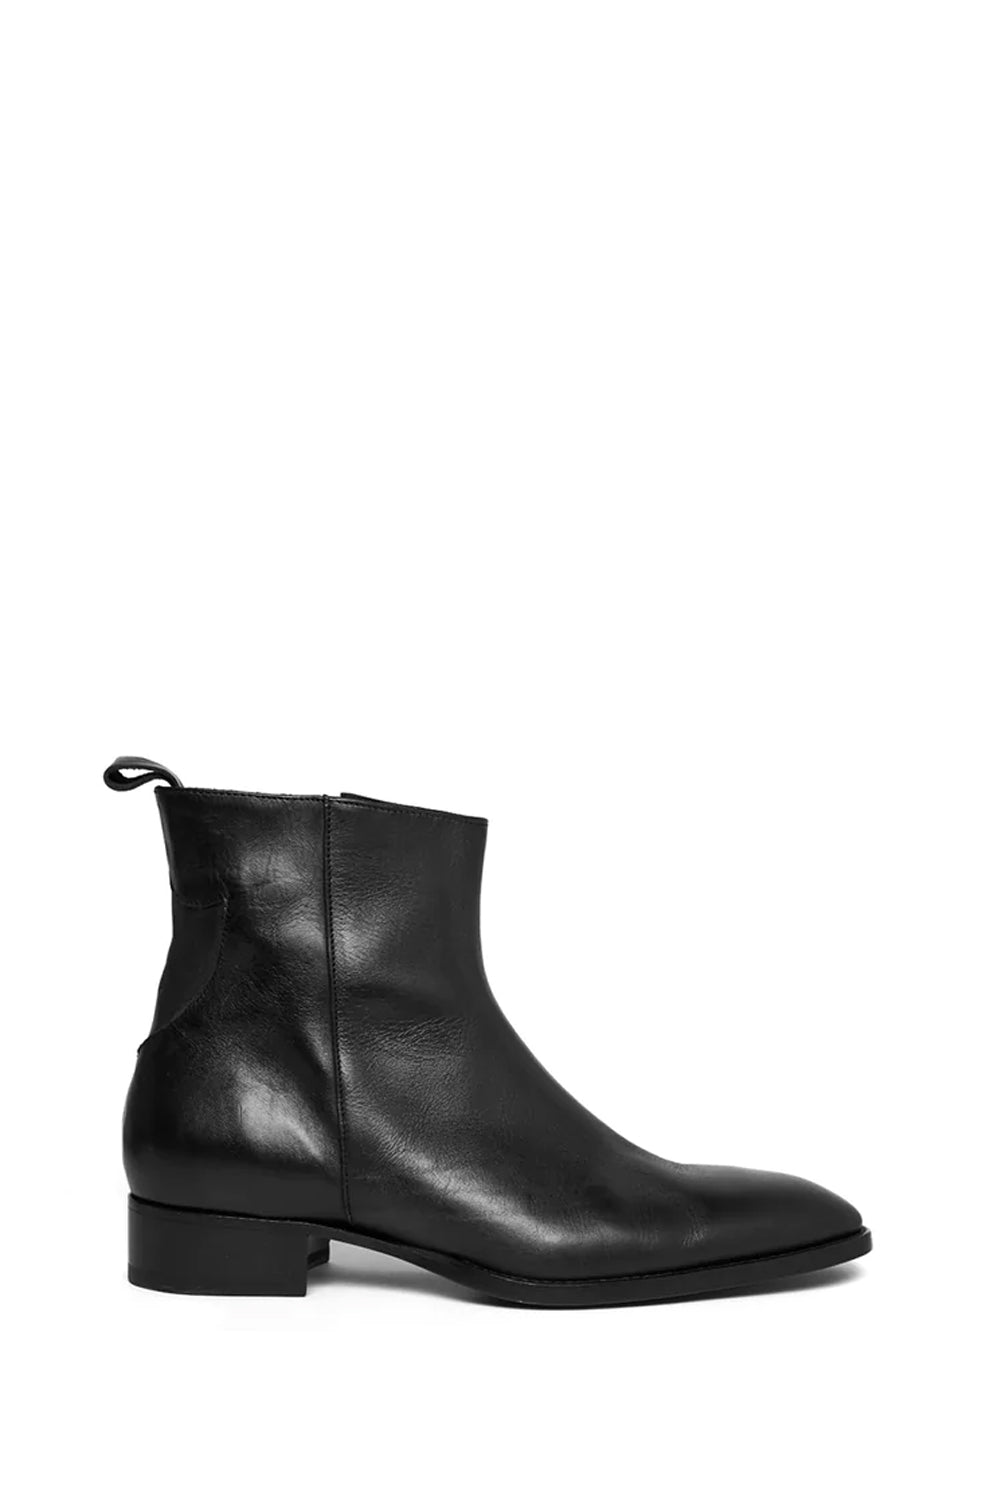 QUENTIN BOOT Black leather boots. Side zip closure. Leather sole, made in Italy. HTC LOS ANGELES